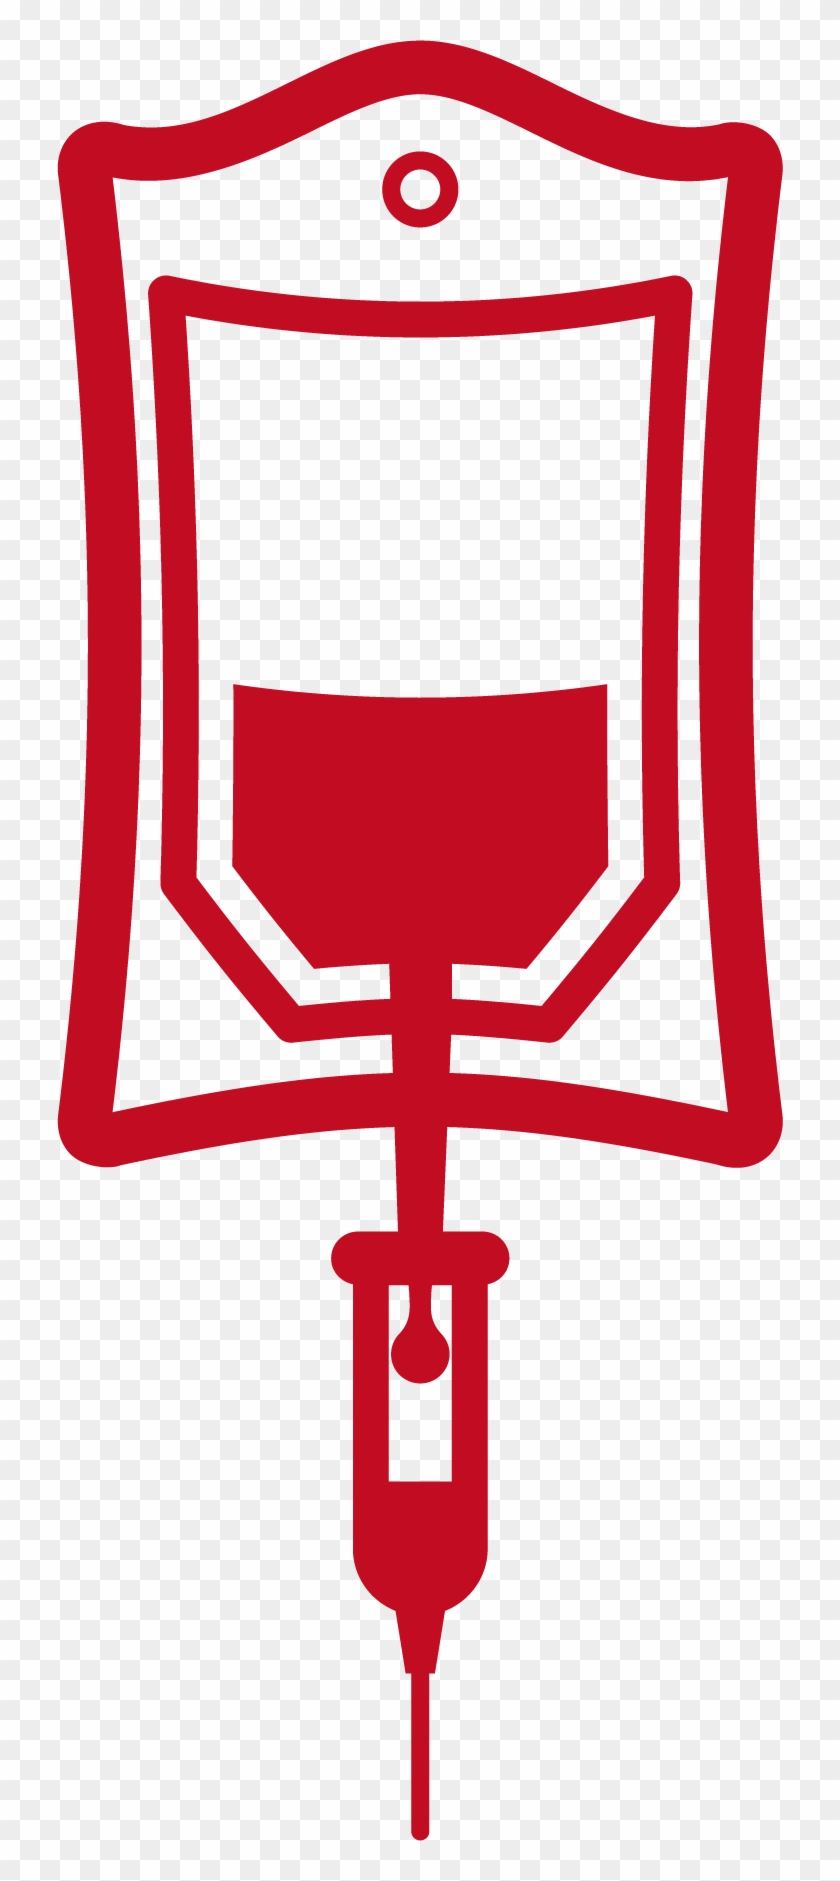 Intravenous Therapy Chemotherapy Infusion Pump Icon - Blood Bag Png #1149347